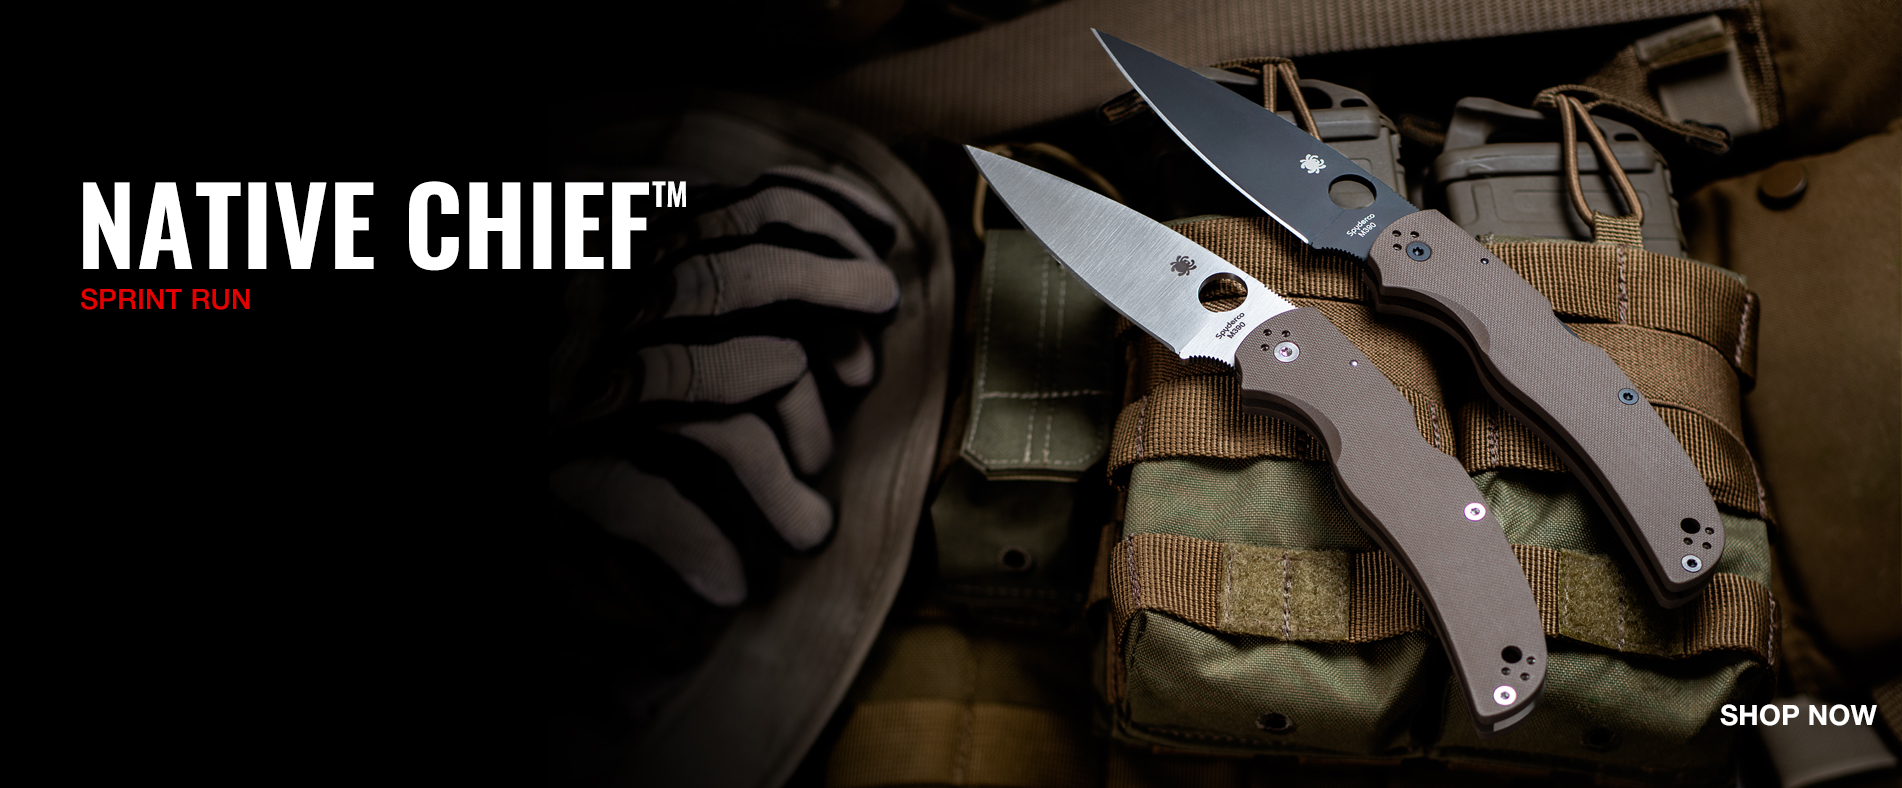 Native Chief Brown G-10 with M390 Blade Steel Now Available. Click to Shop or for more information